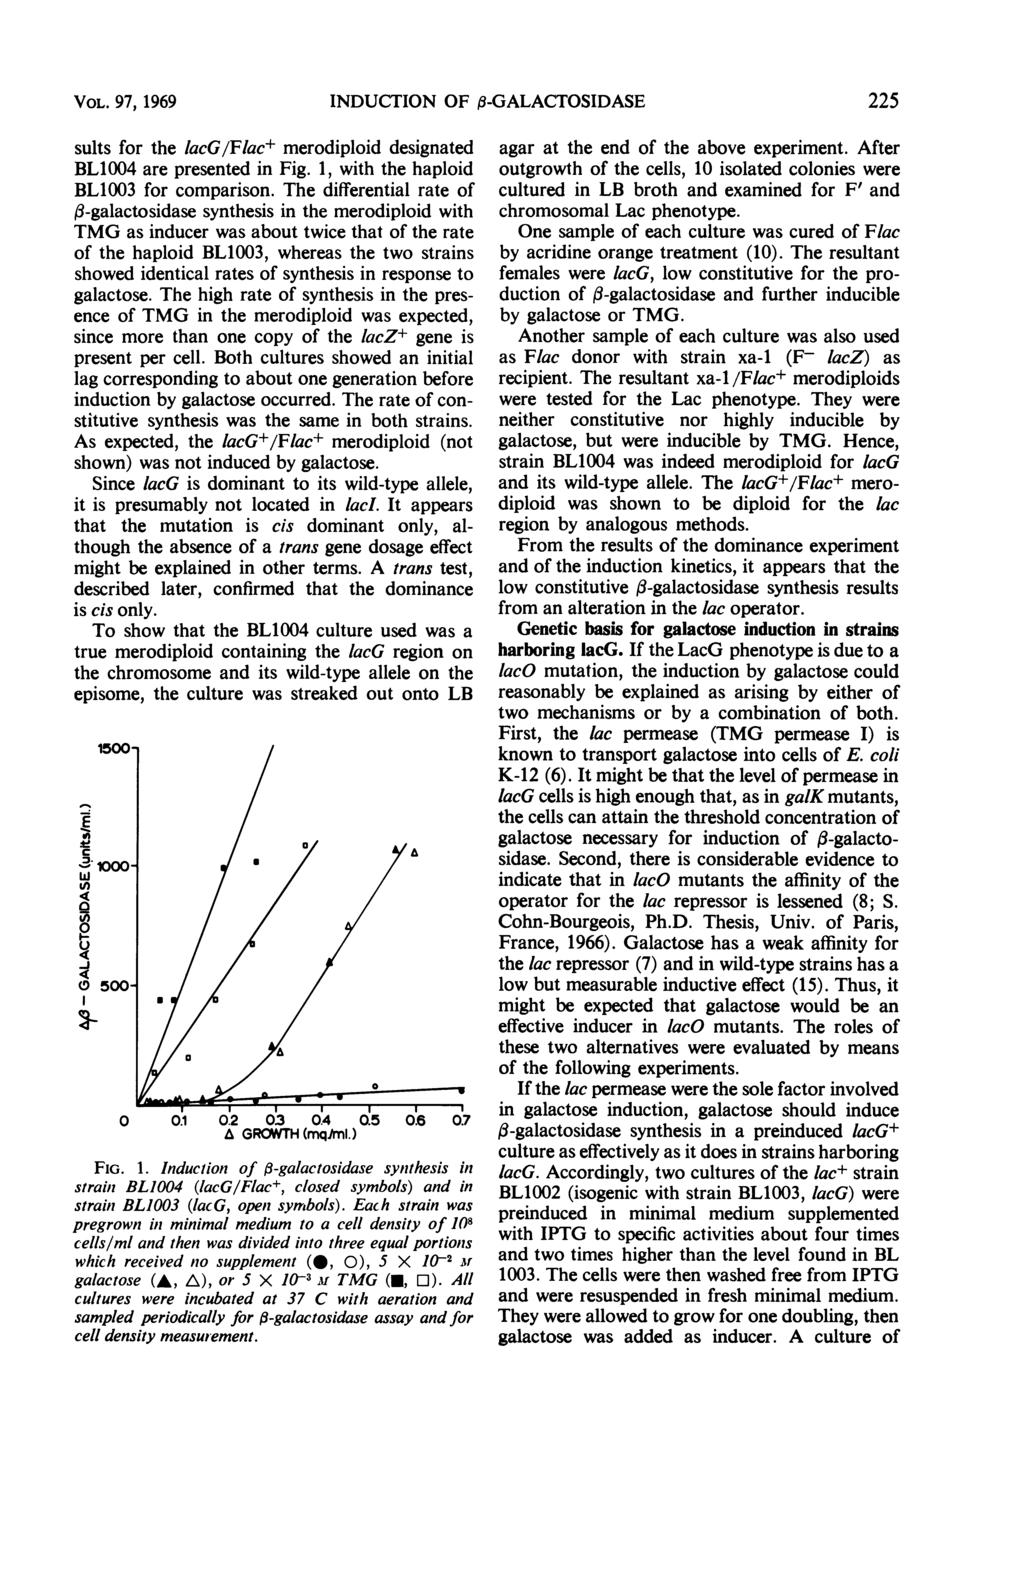 VOL. 97, 1969 NDUCTON OF 3-GALACTOSDASE 225 sults for the lacg/flac+ merodiploid designated BL14 are presented in Fig. 1, with the haploid BL13 for comparison.